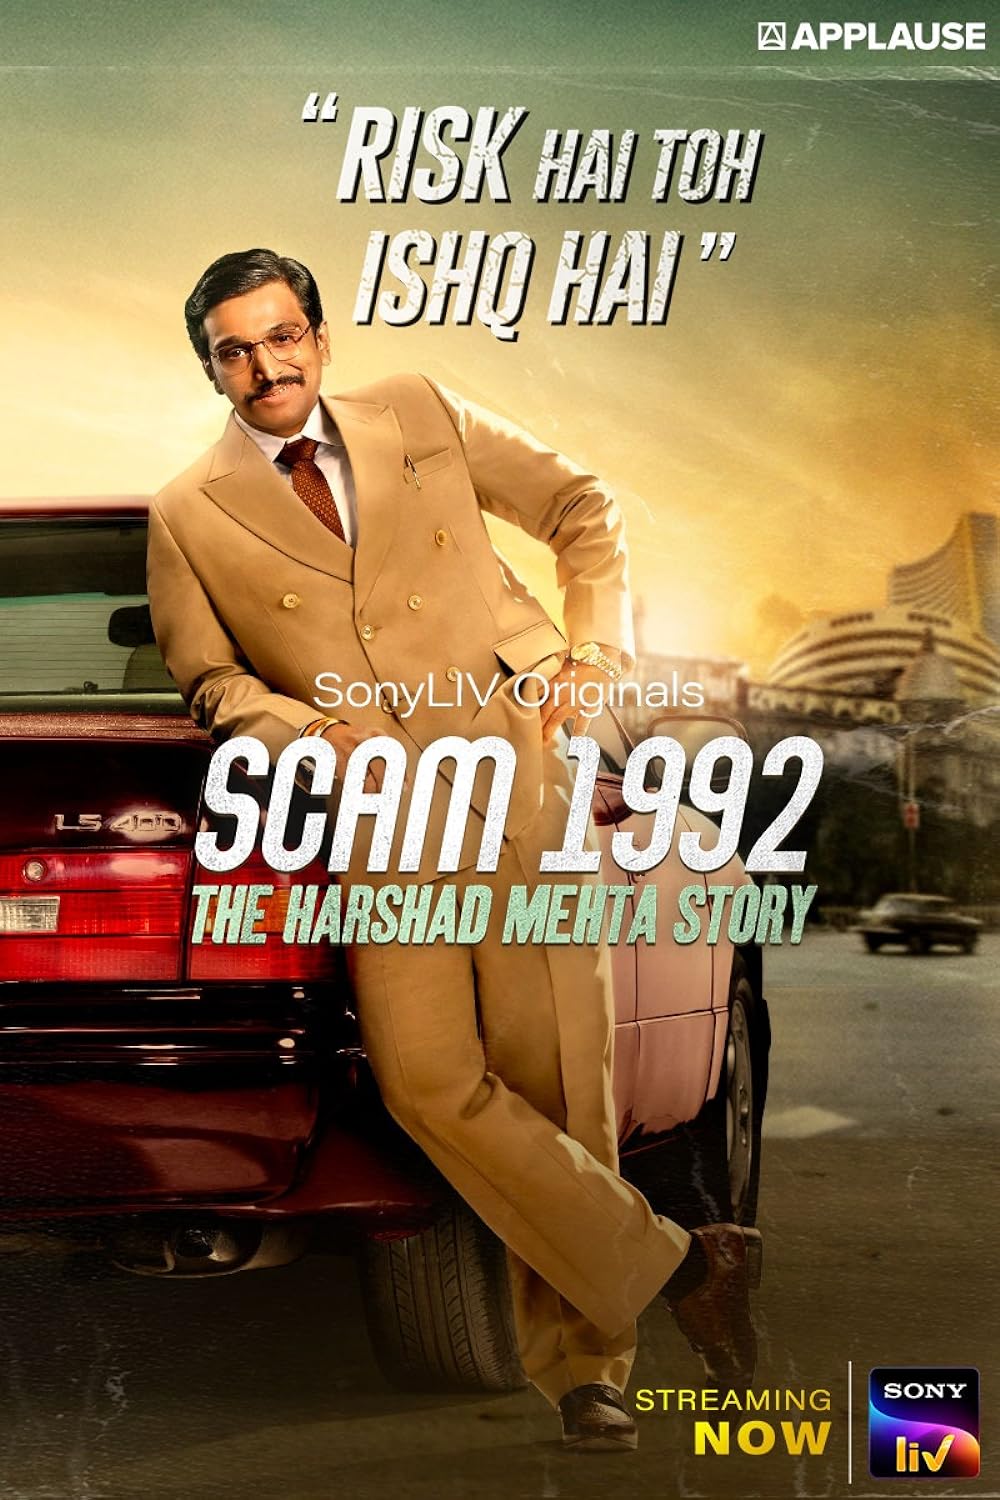 Download Scam 1992: The Harshad Mehta Story 2020 (Season 1) Hindi {Sony LIV Series} WEB-DL  || 480p [150MB] || 720p [400MB] || 1080p [650MB]